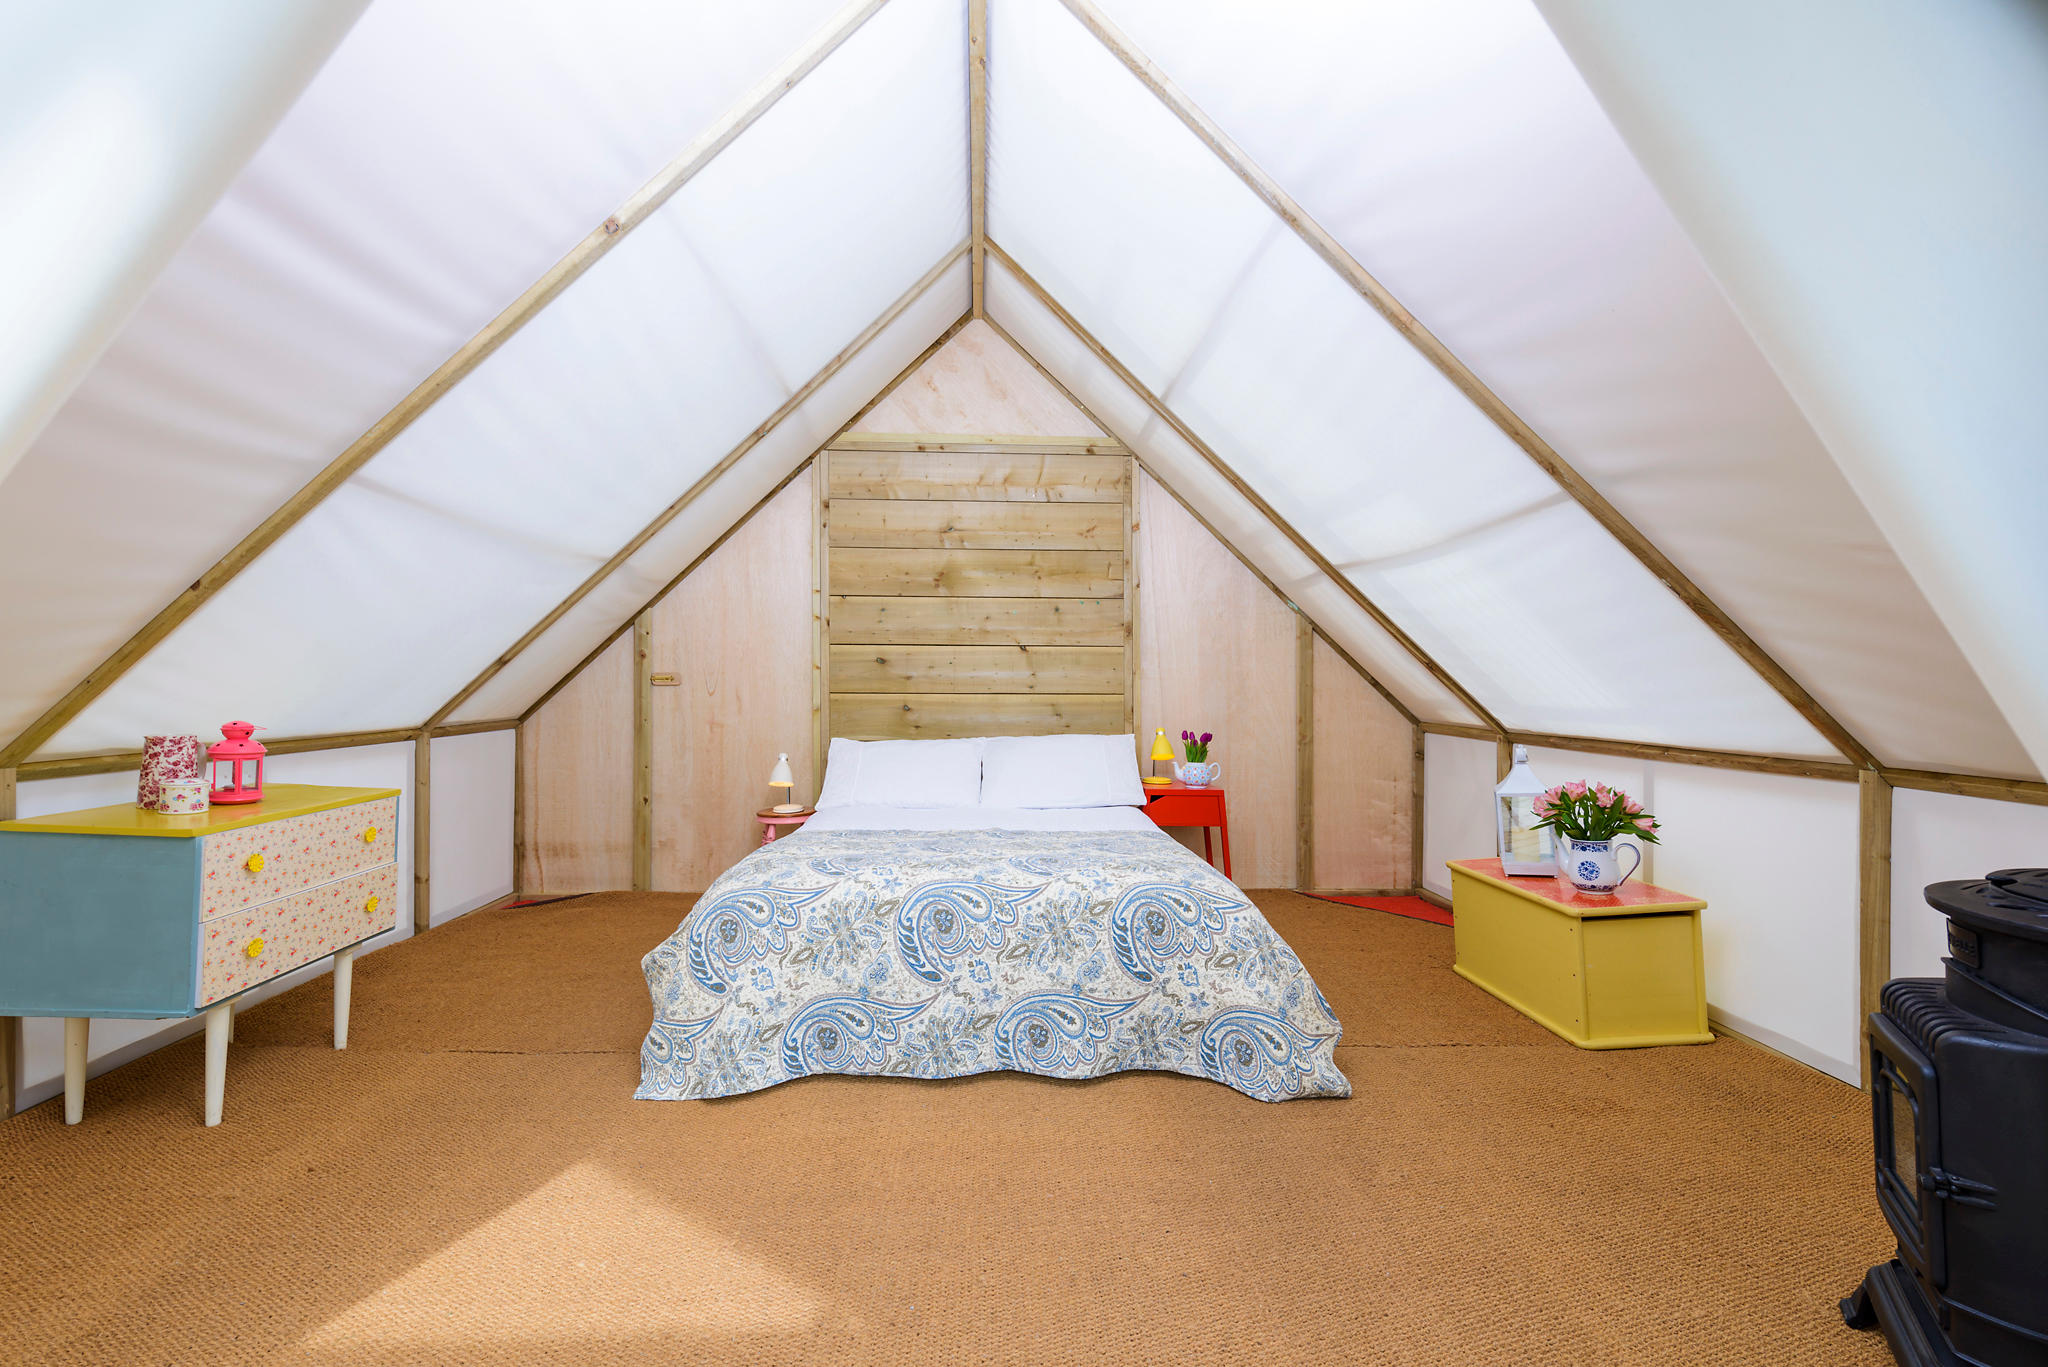 The Romantic Glamping Suites at Killarney Glamping at The Grove provide a gorgeous option with lots  Killarney Glamping At The Grove Kerry 087 975 0110